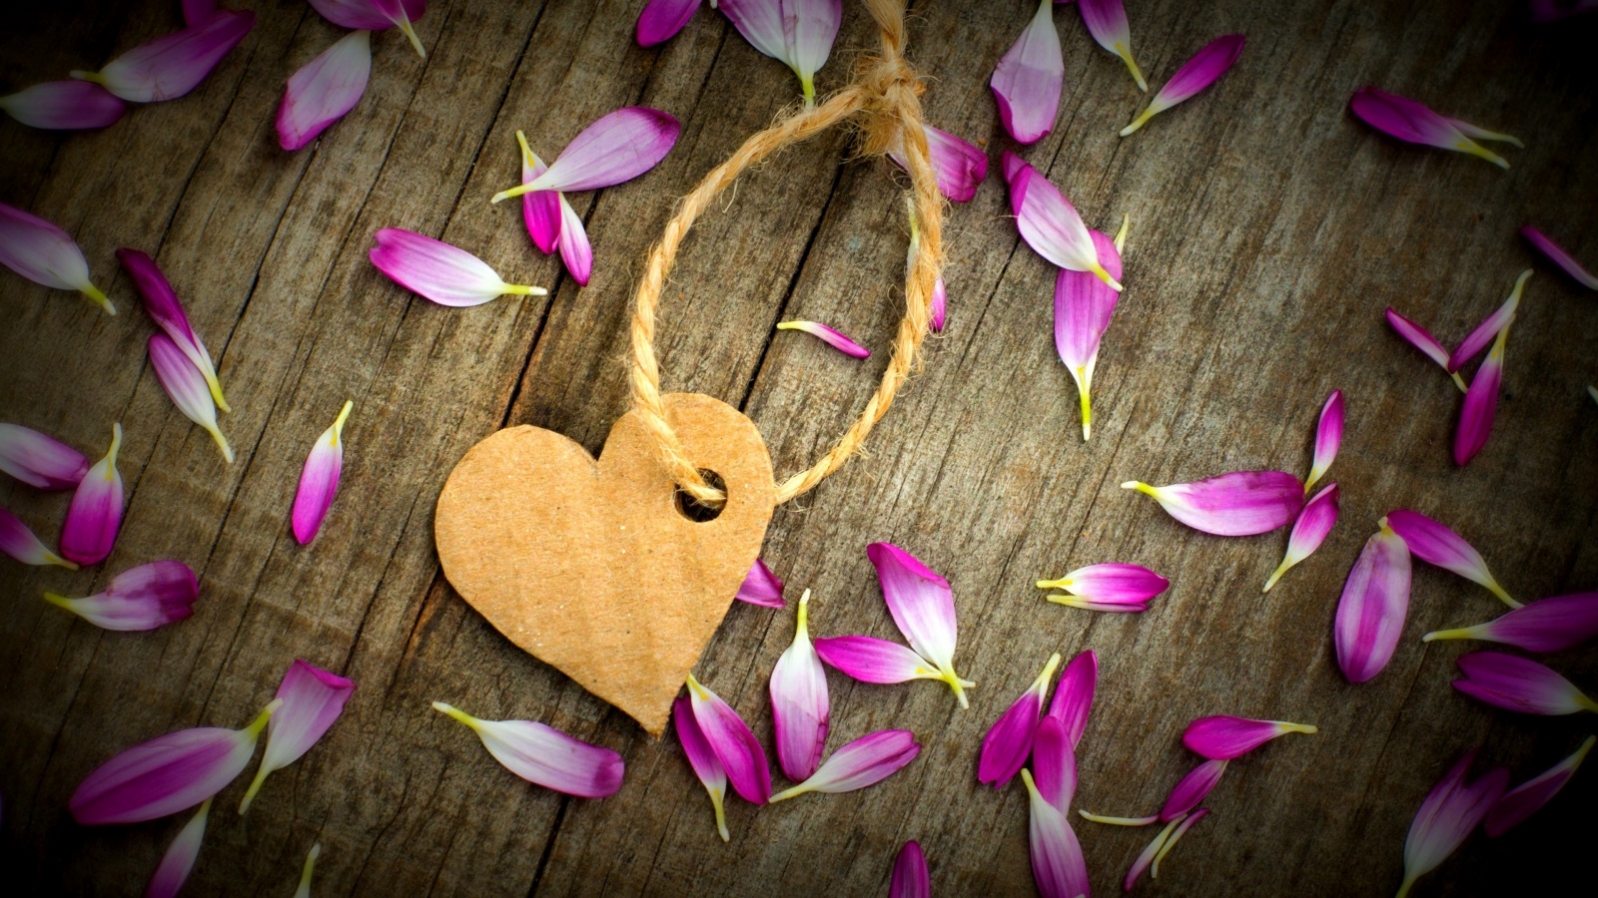 Pretty Backgrounds For Facebook Cover Photo Cute Cover - Amazing Love  Images Hd - 1598x898 Wallpaper 